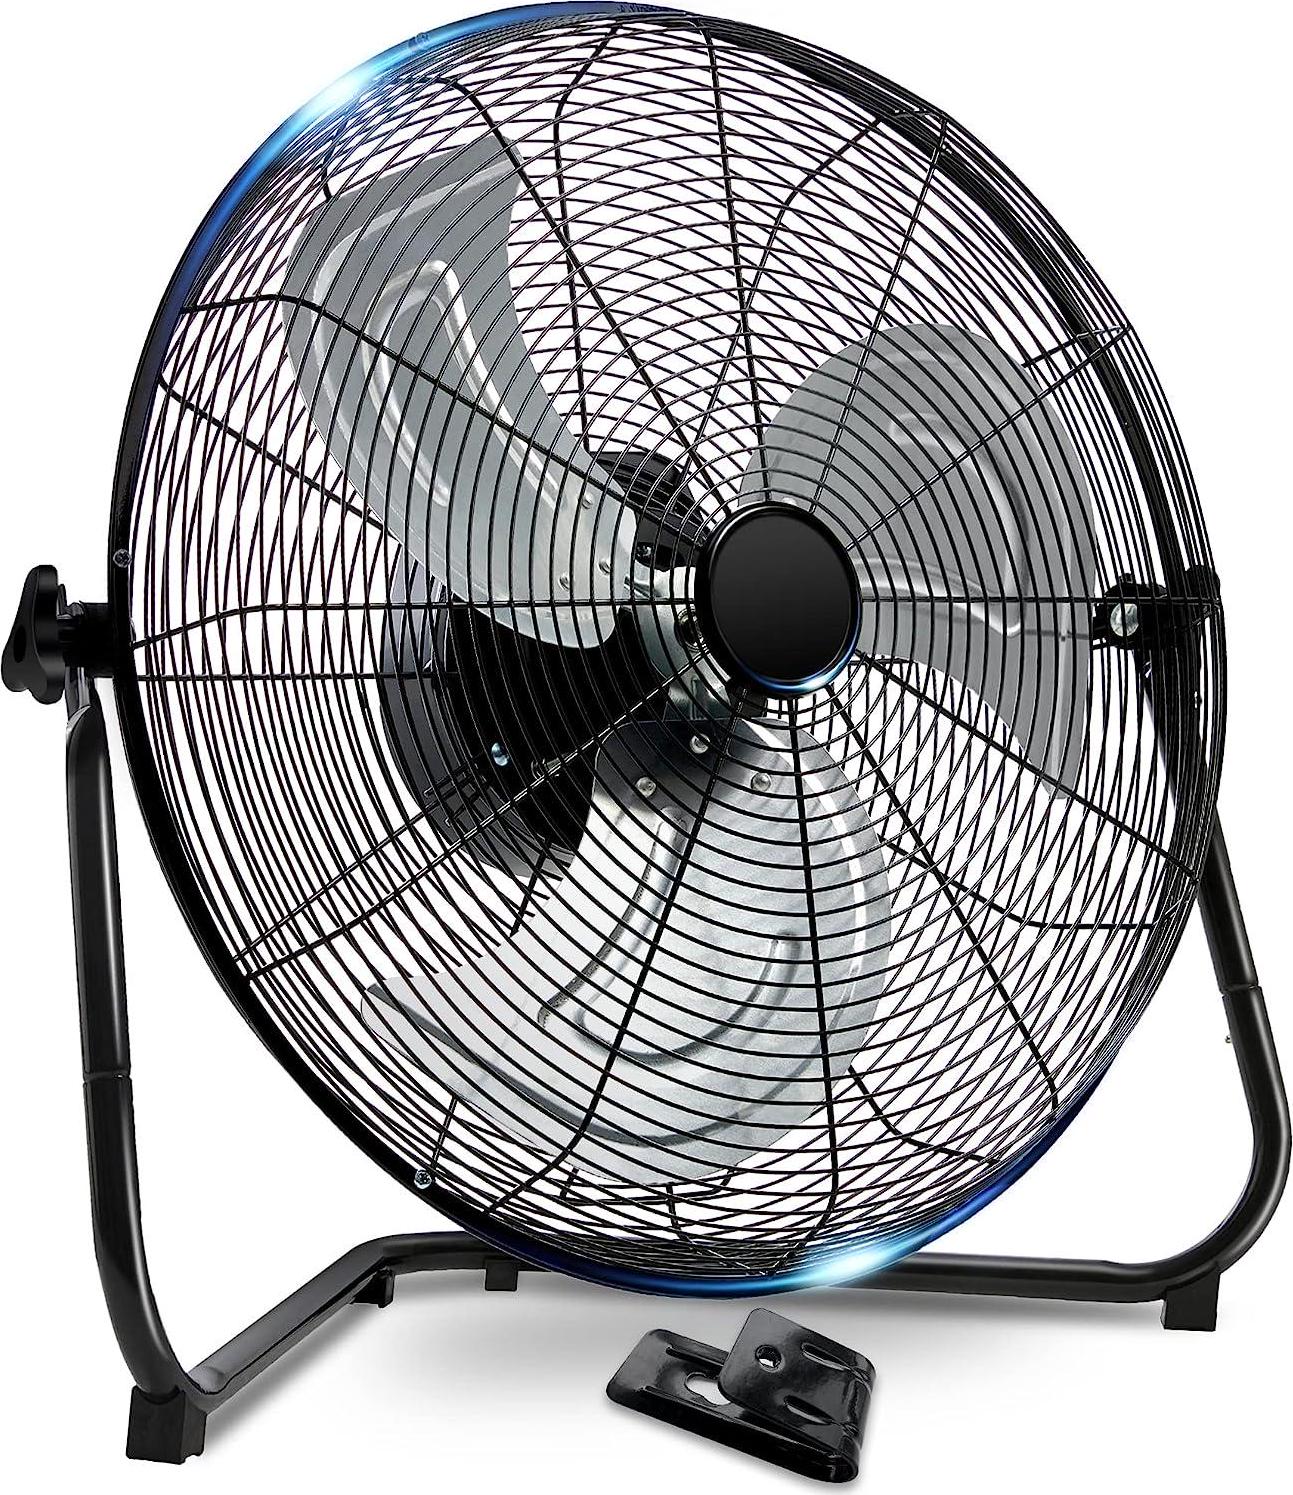 FLAME 6000 CFM Floor Fan High Velocity,20 Inch 3-Speed Heavy Duty Metal Fan with Wall-Mounting System,360° Adjustable Tilting for Garage, Industrial, Commercial,Shop and Gym, Use for Home, Bedroom Outdoor/Indoor-